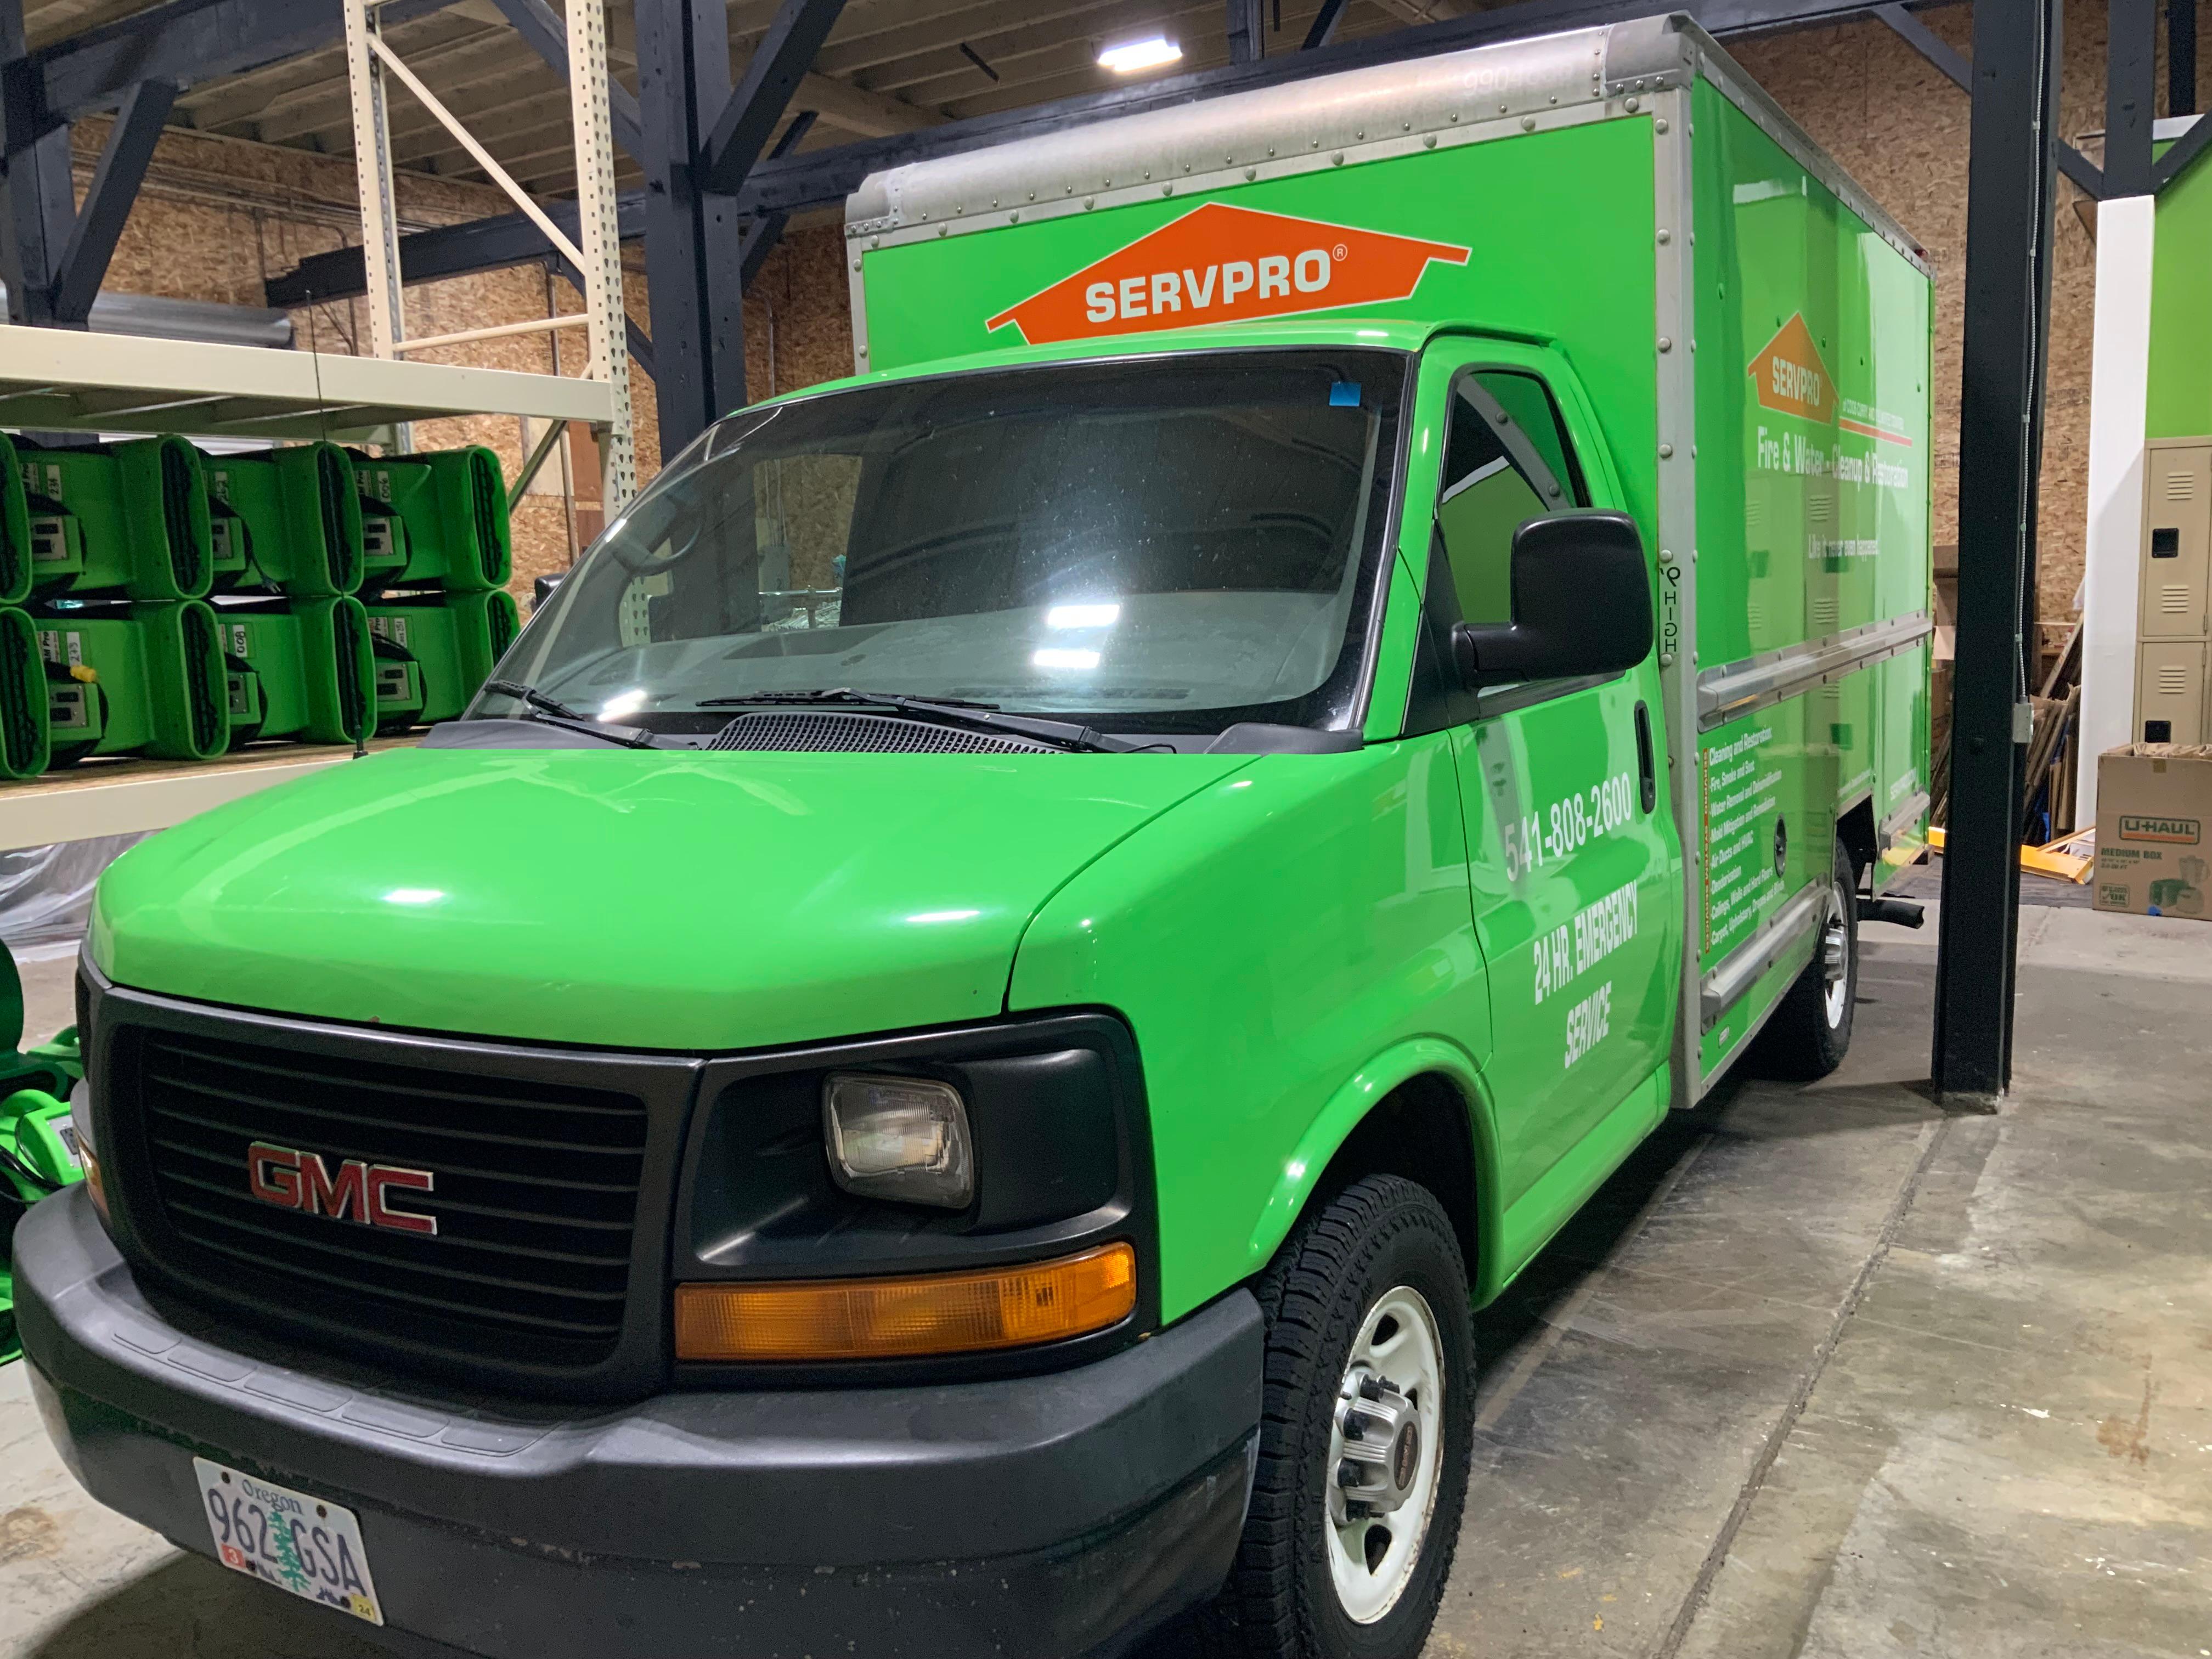 Servpro 16' truck in the Servpro bay, loaded contents that are ready to be unloaded and  placed into storage.